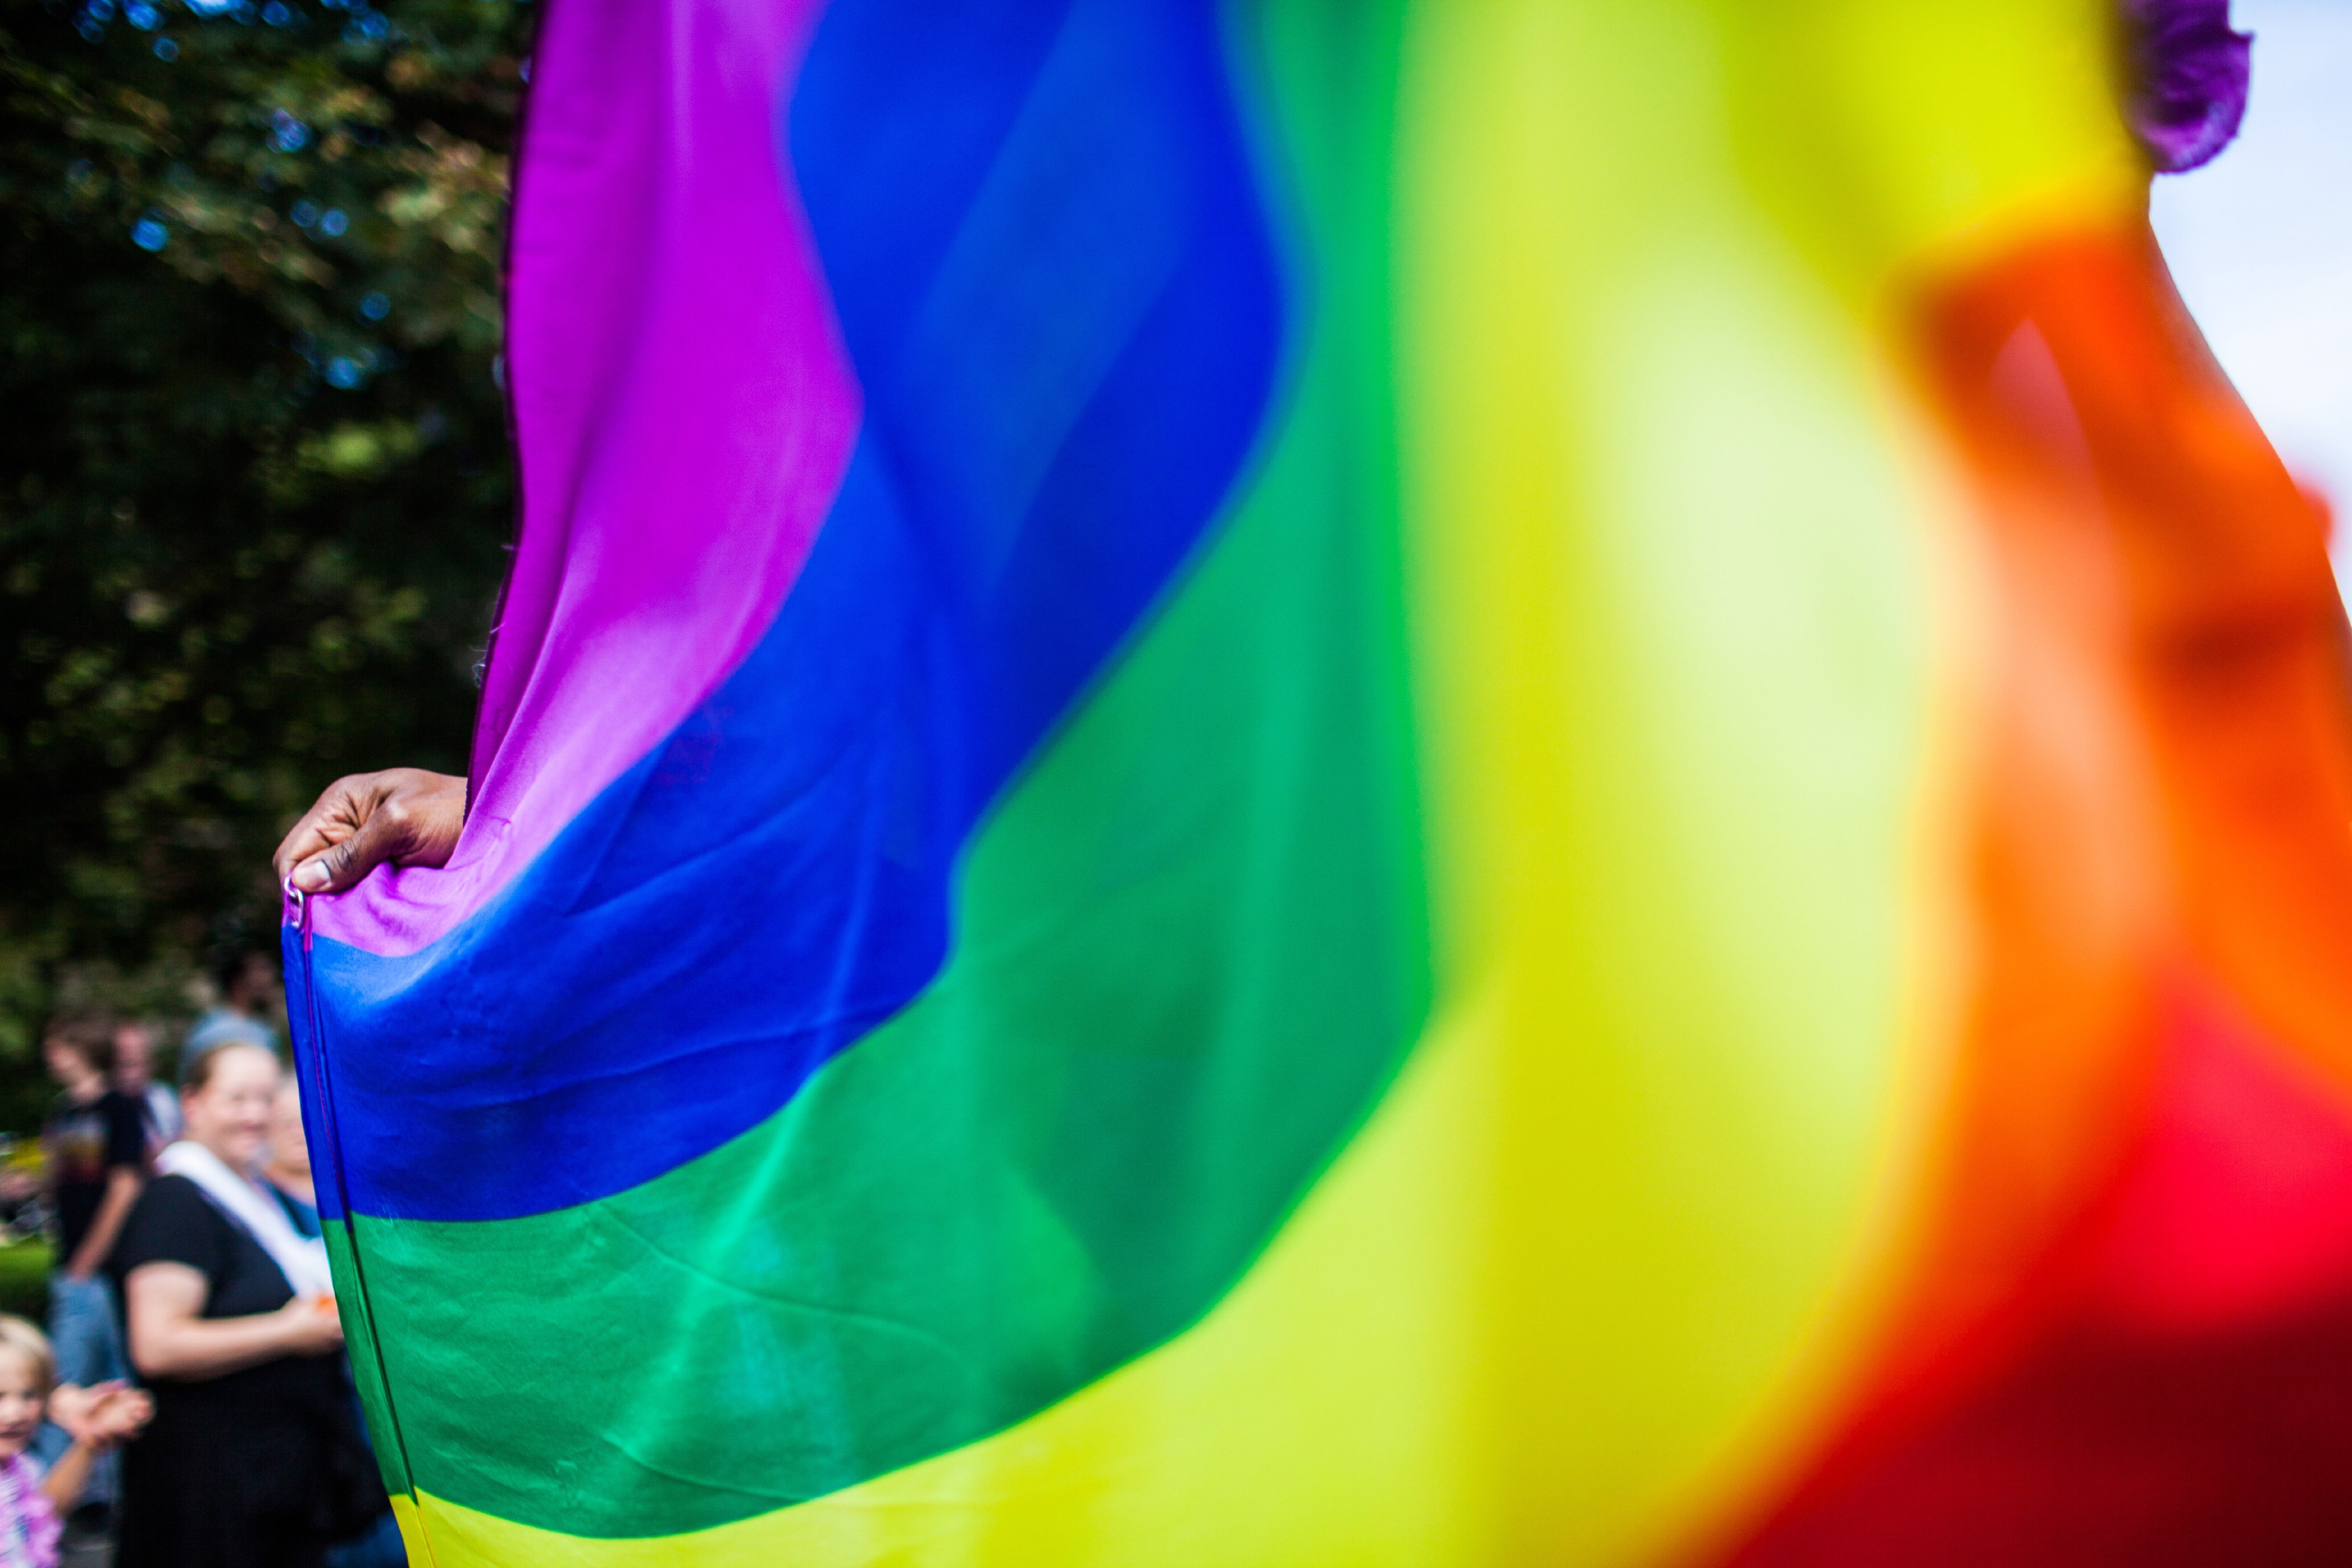 A gay parade participant is waving the rainbow flag, which has become a strong symbol for the worldwide LGBT community, in Denmark in 2013 (PYMCA—UIG/Getty Images)